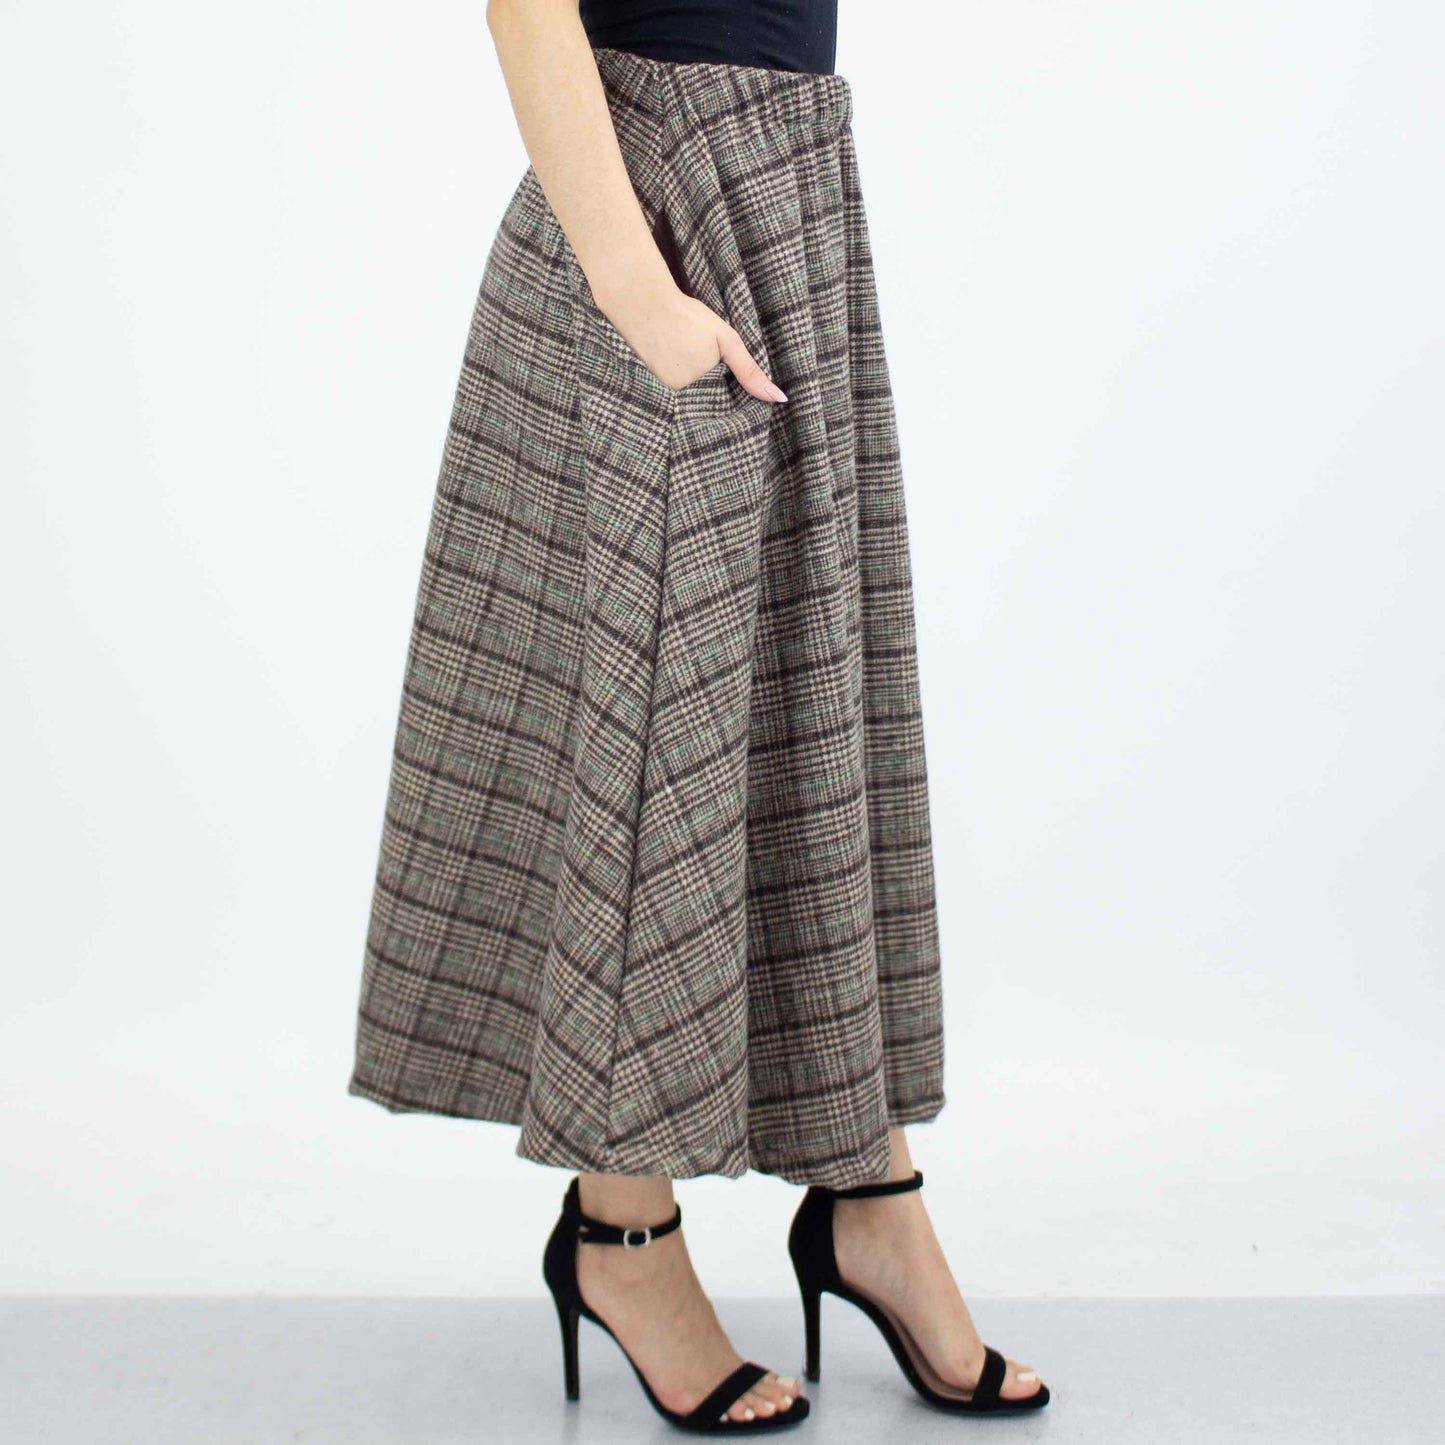 Plaid Flare Midi Skirt with Side Pockets - Brown